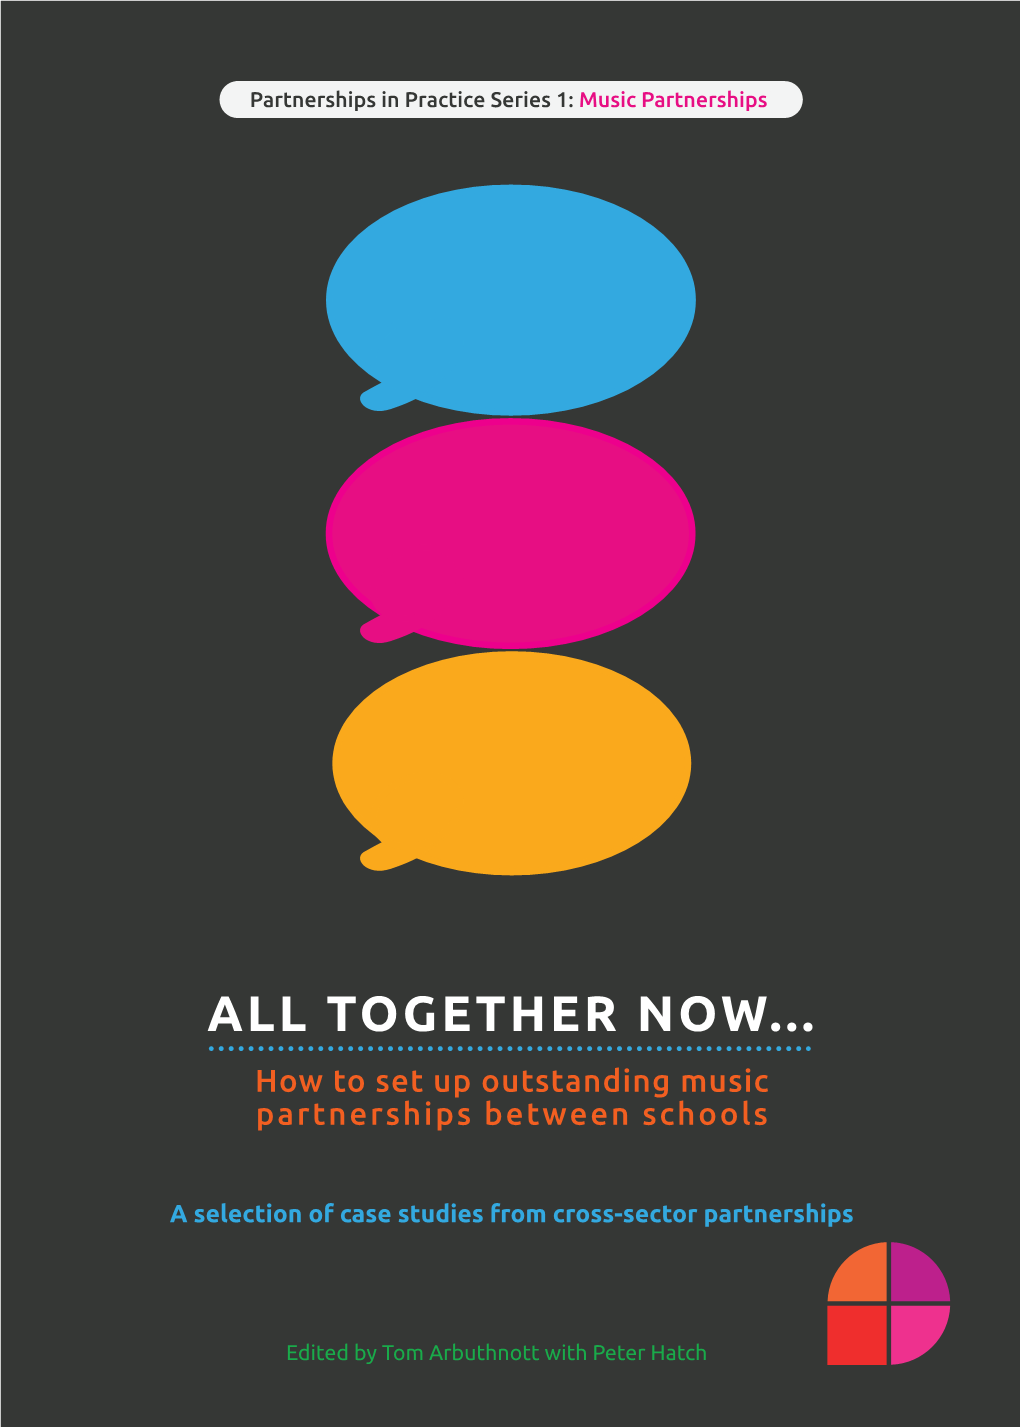 ALL TOGETHER NOW... How to Set up Outstanding Music Partnerships Between Schools